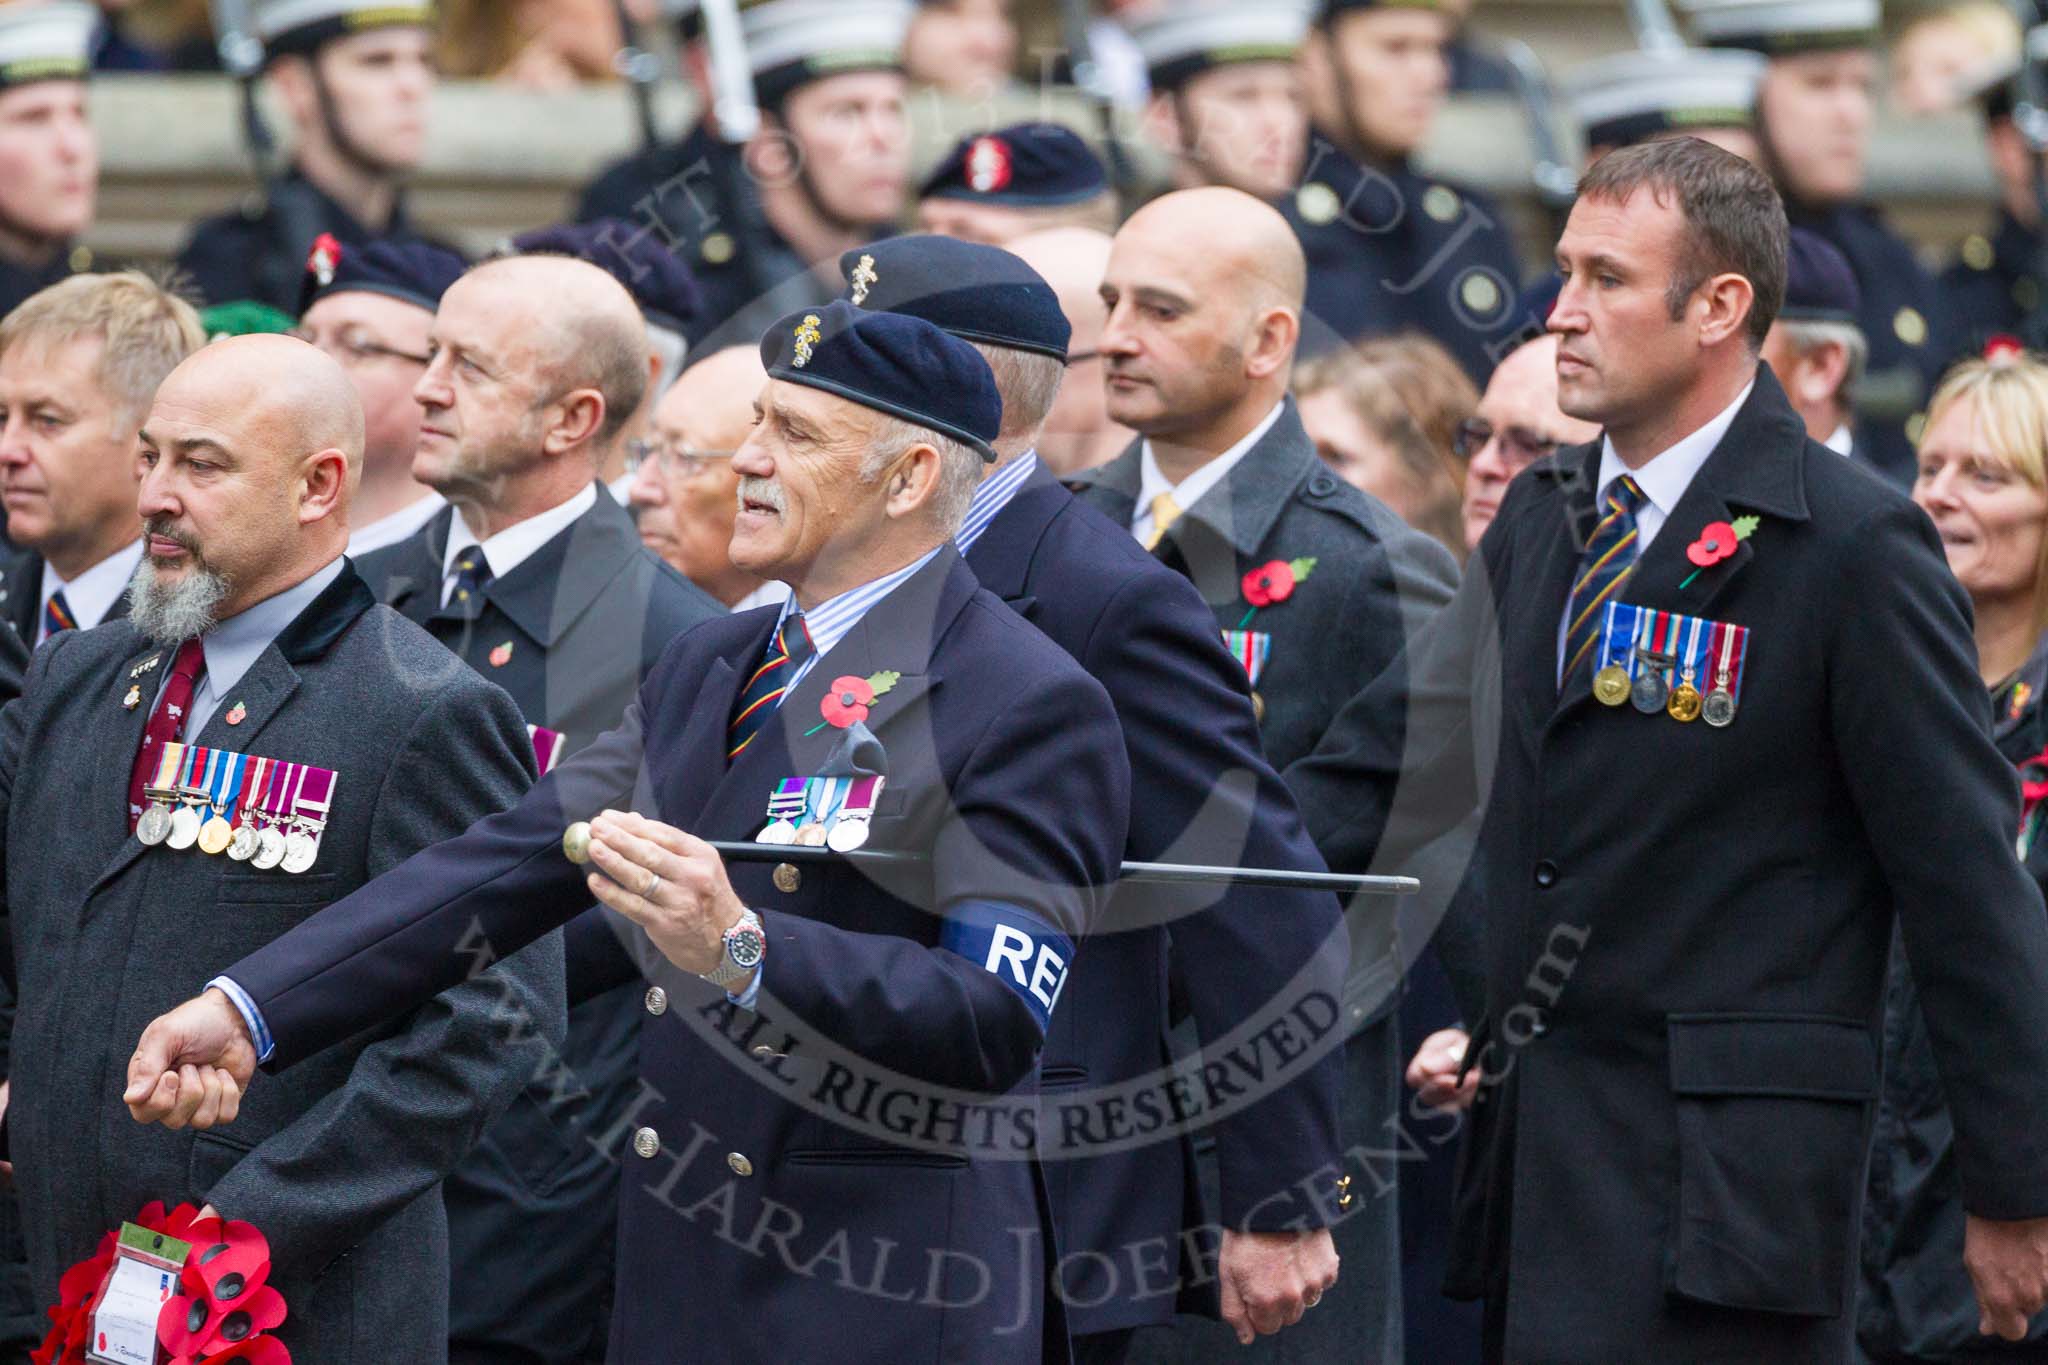 Remembrance Sunday at the Cenotaph 2015: Group B15, Royal Electrical & Mechanical Engineers Association.
Cenotaph, Whitehall, London SW1,
London,
Greater London,
United Kingdom,
on 08 November 2015 at 11:39, image #124